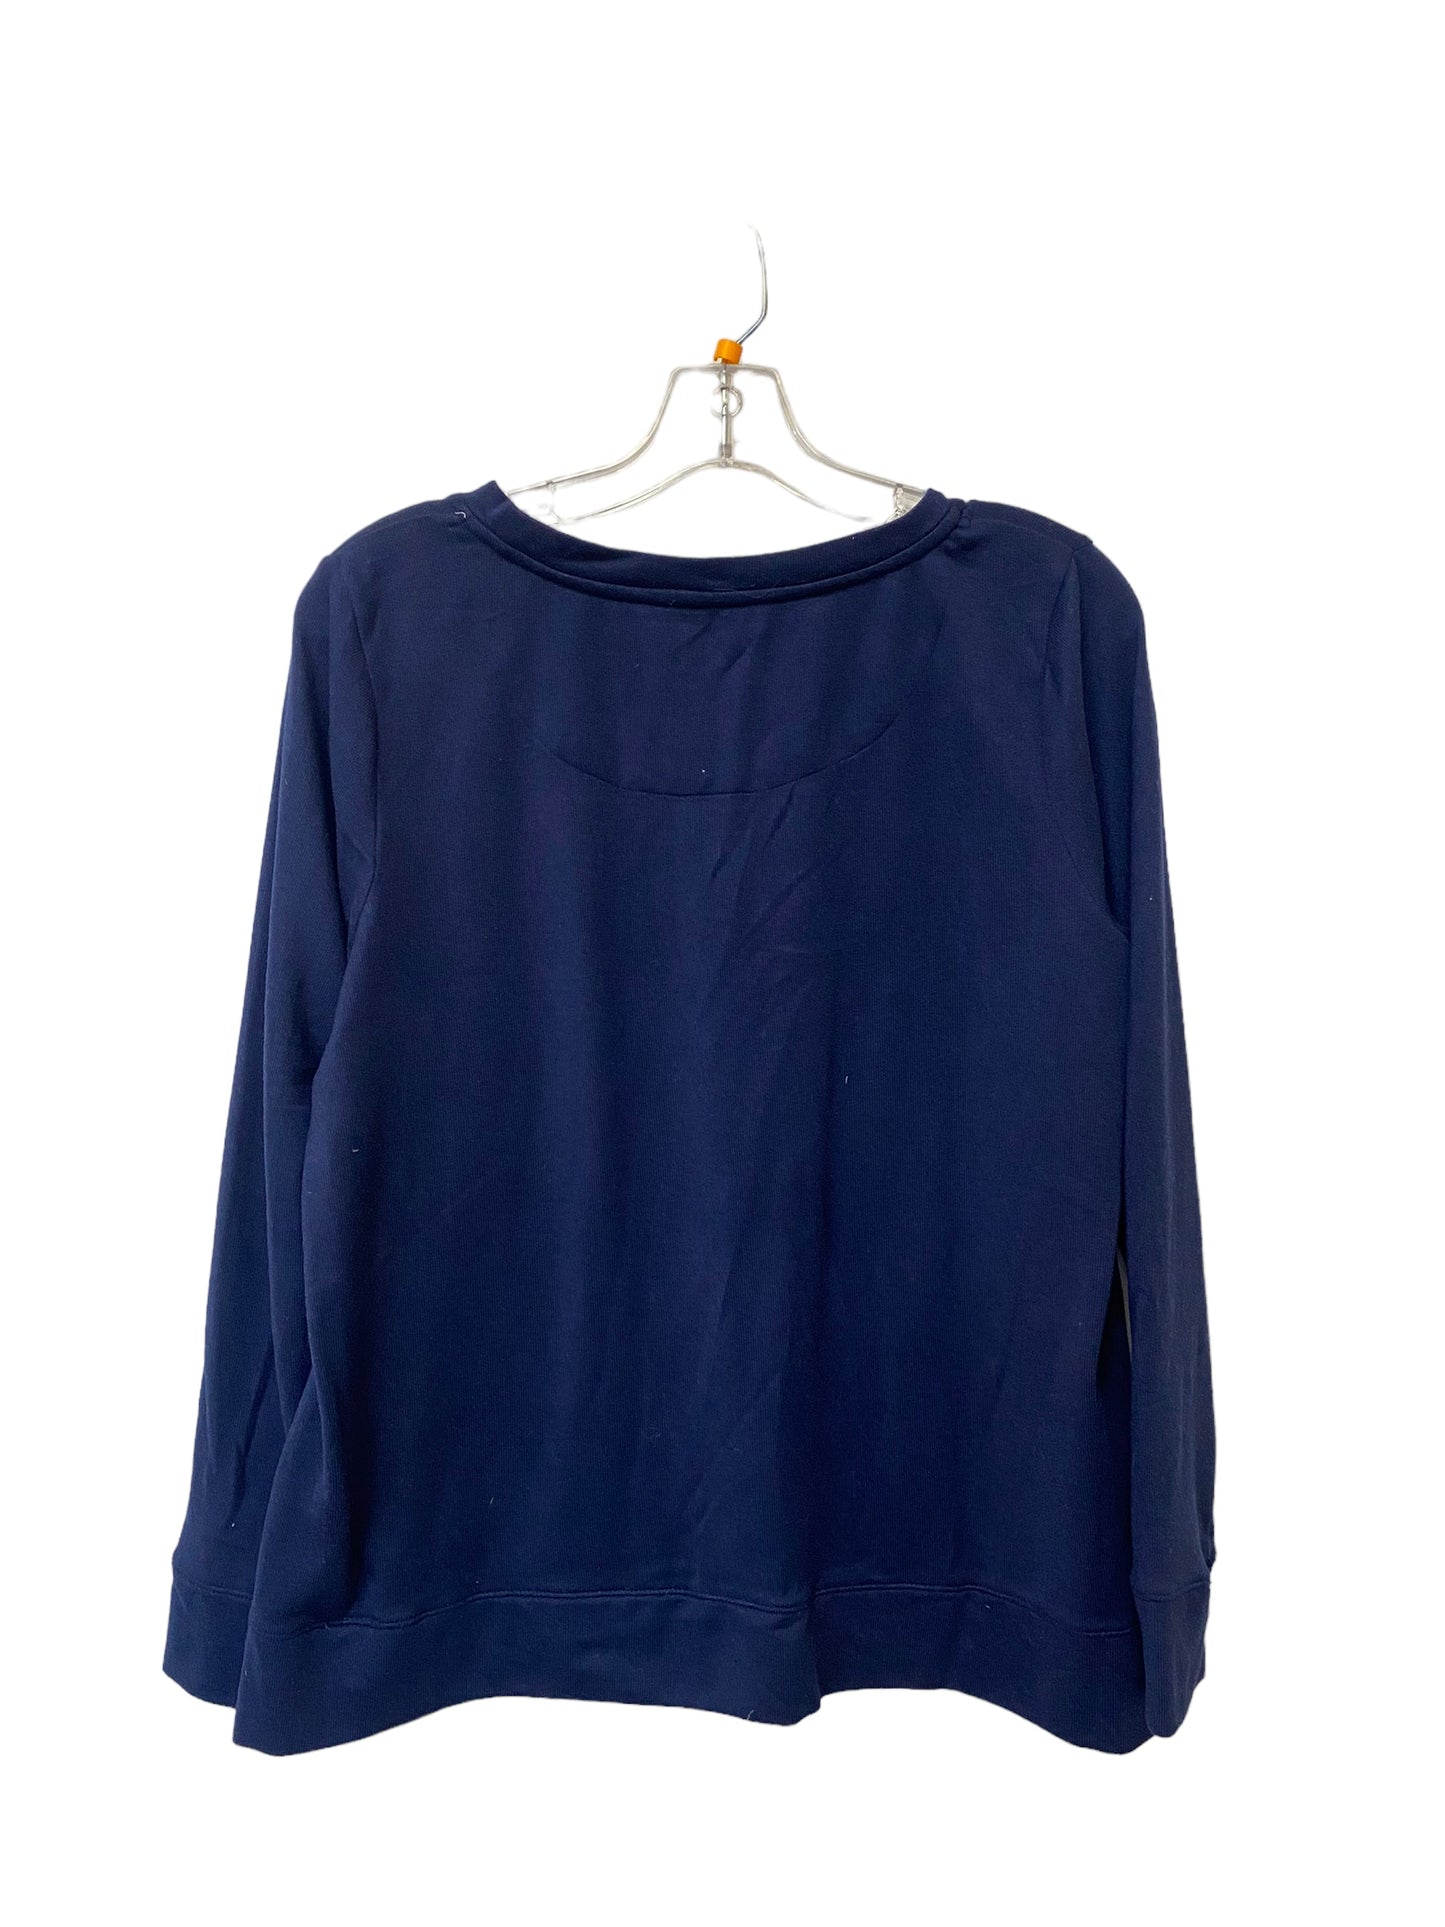 Top Long Sleeve By Kate Spade  Size: M